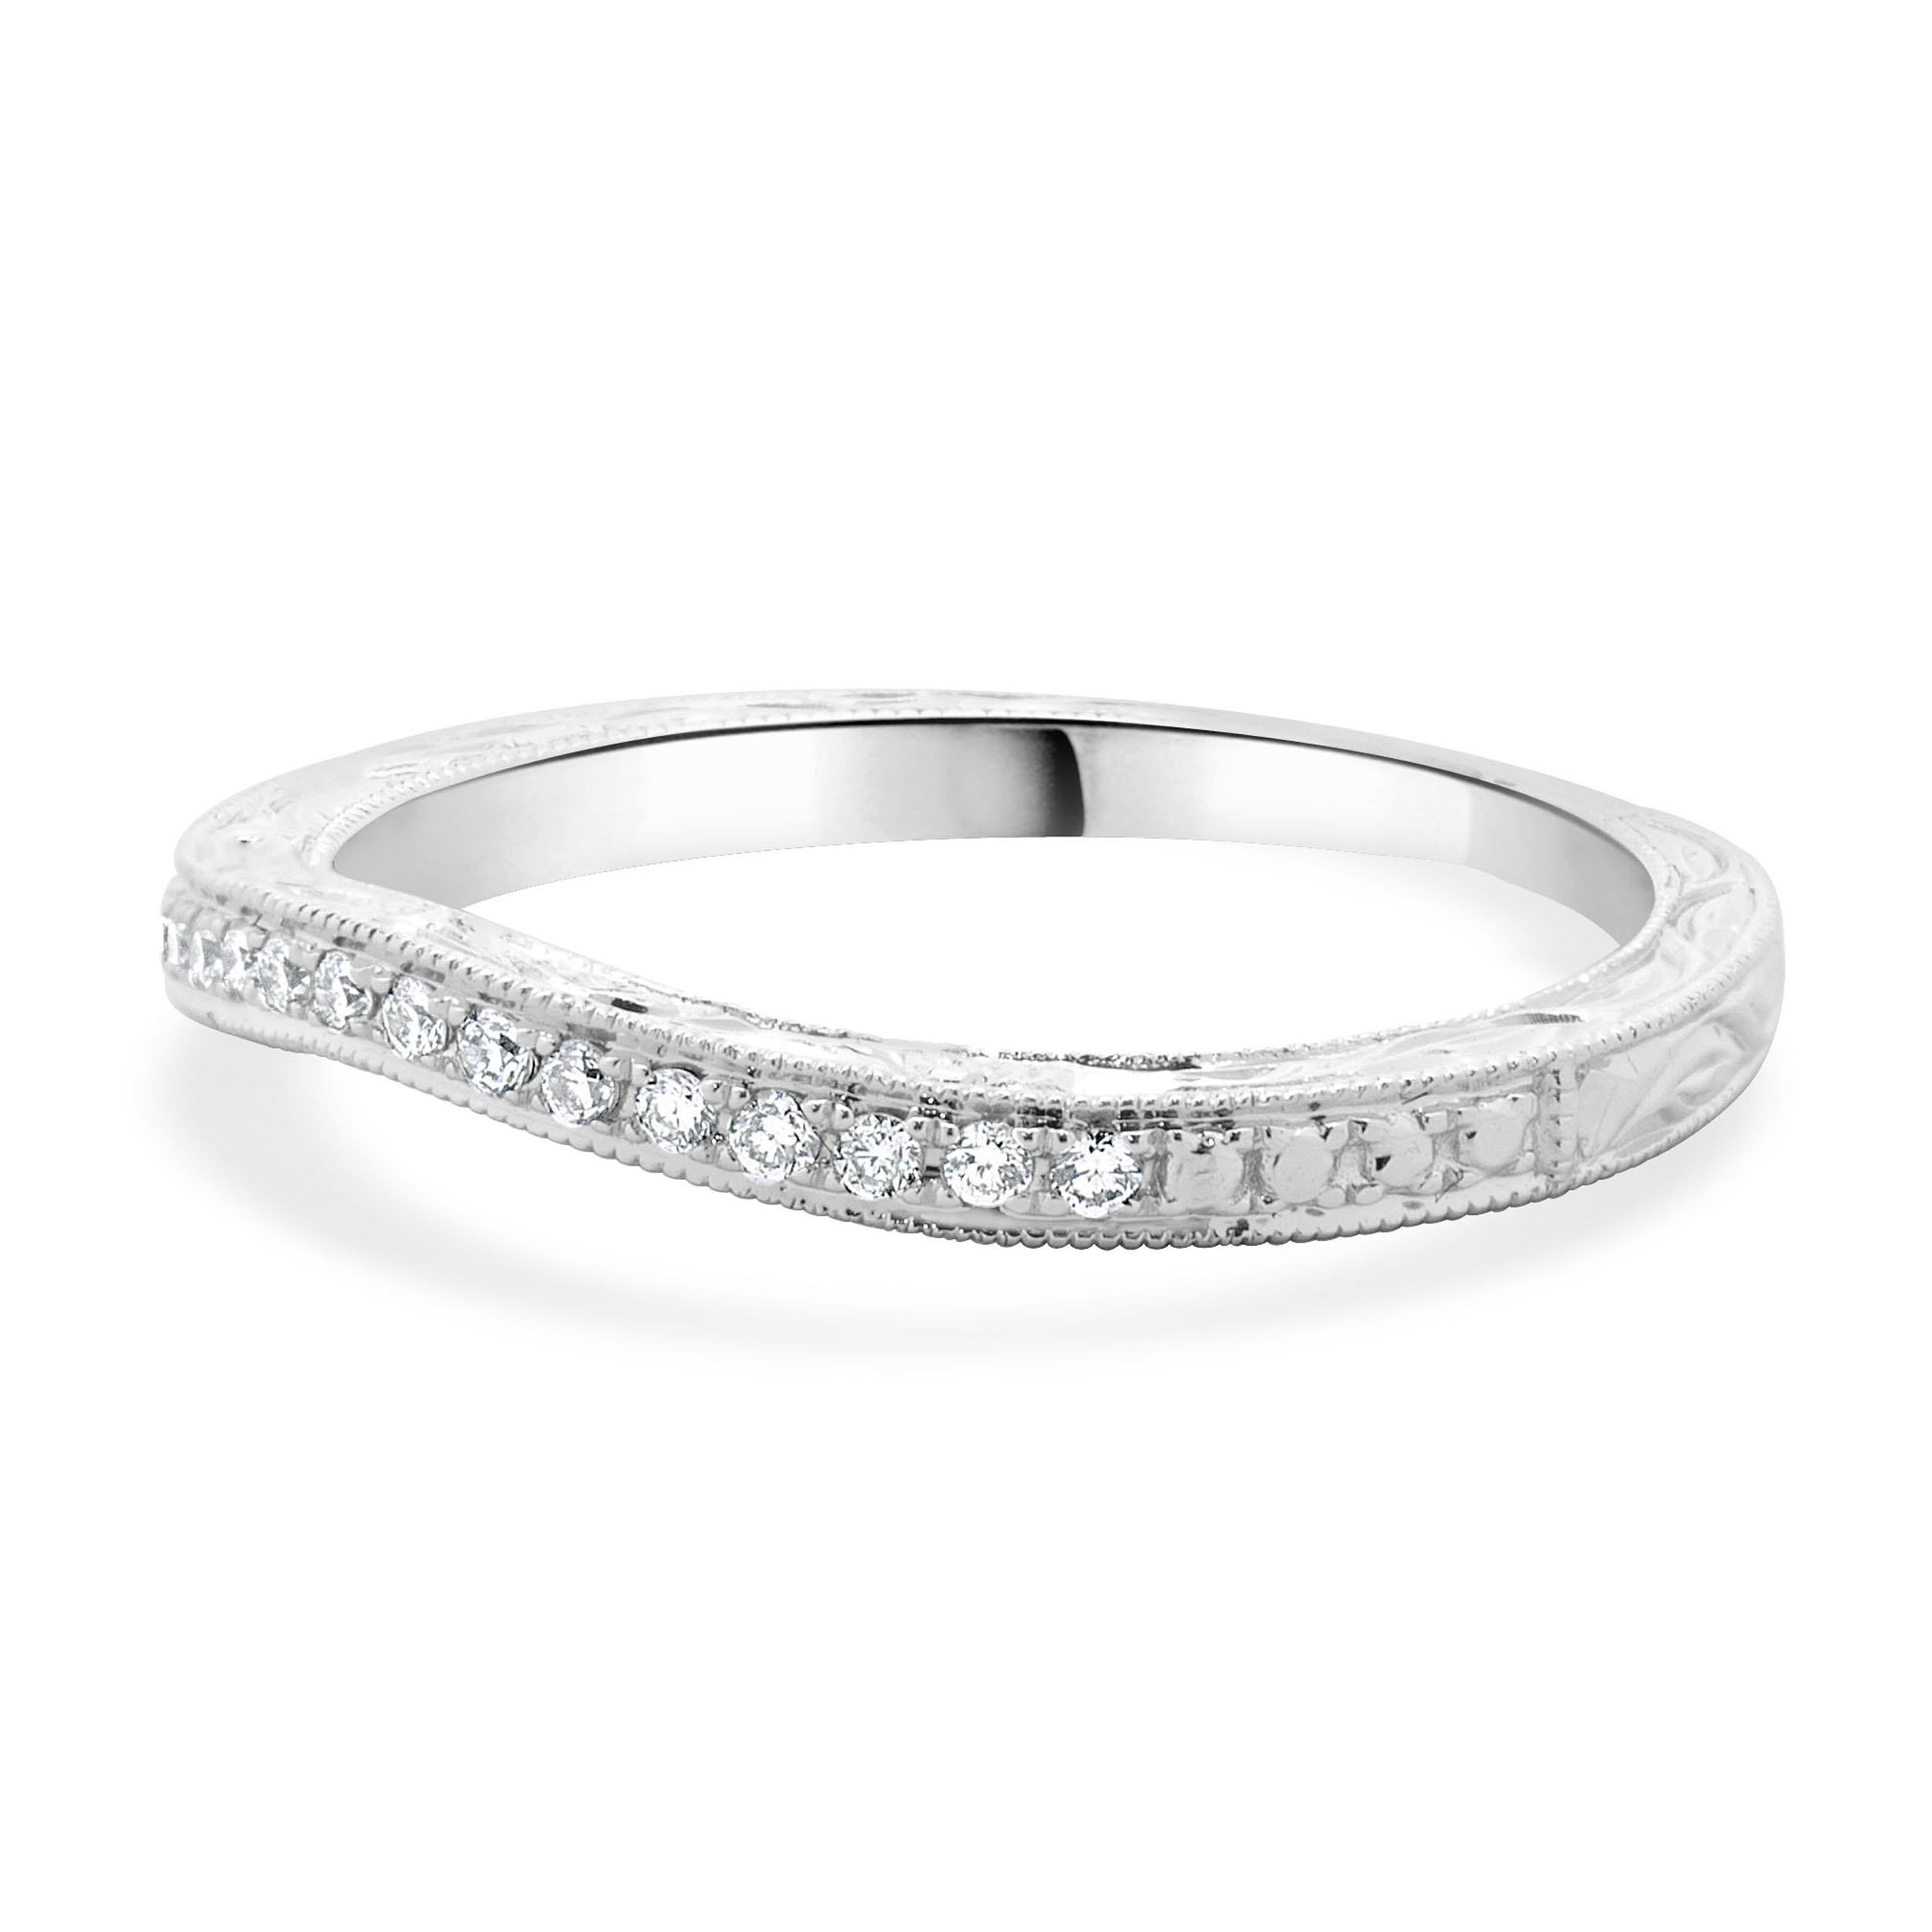 Designer: Custom
Material: 14K white gold
Diamonds: 17 round brilliant cut = 0.09cttw
Color: H
Clarity: SI1
Size: 5 sizing available 
Dimensions: ring measures 2mm in width
Weight: 2.00 grams
